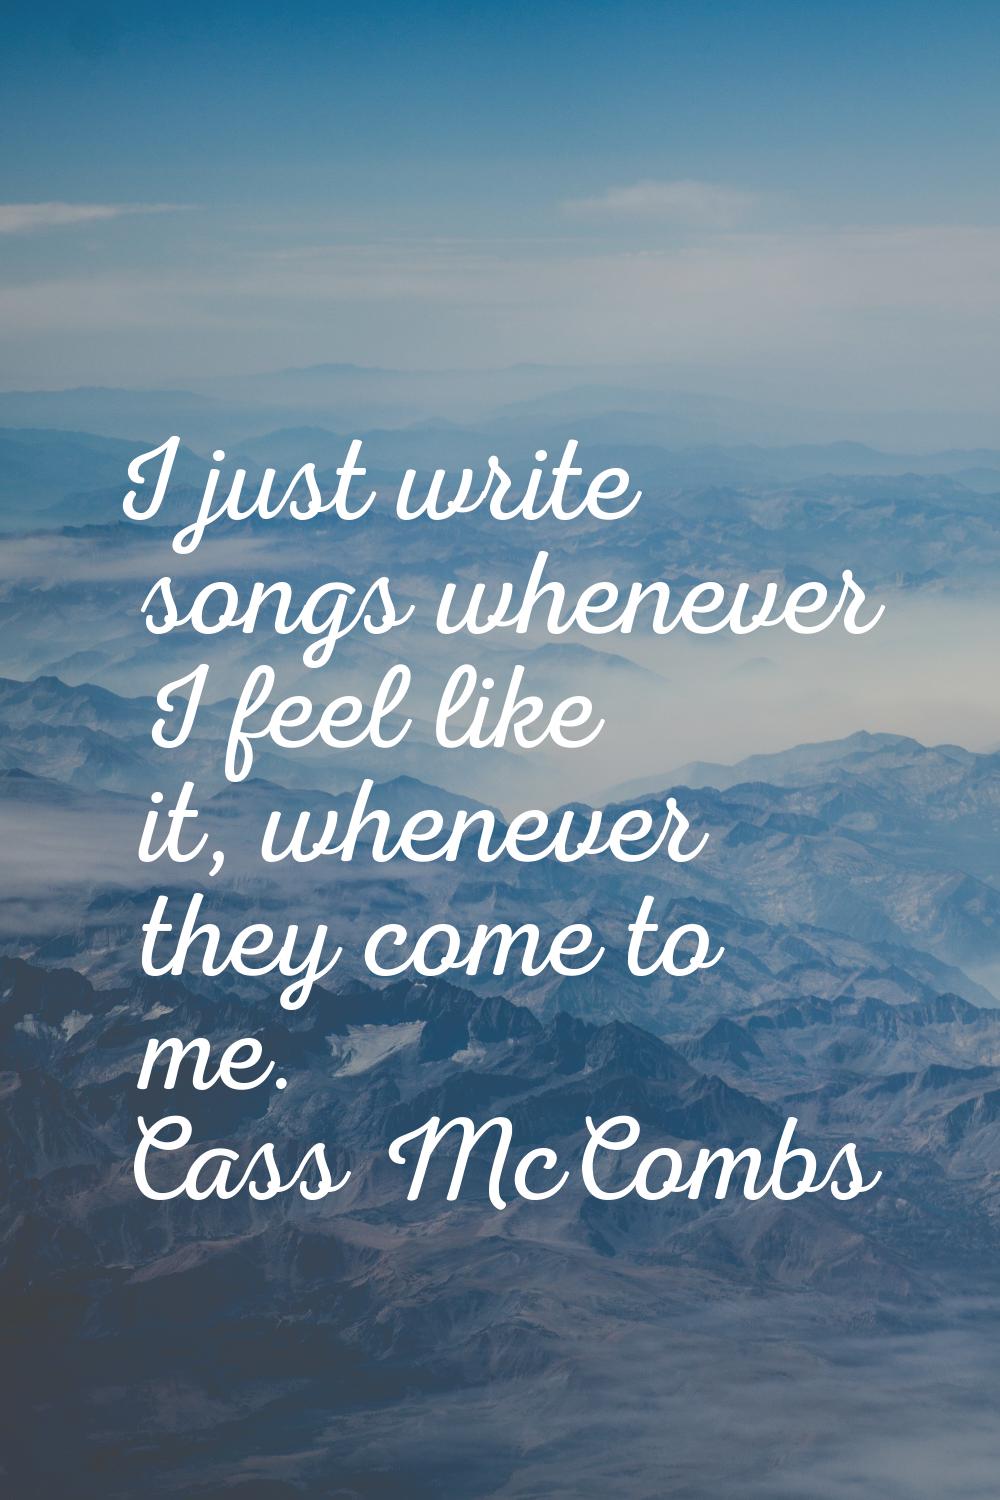 I just write songs whenever I feel like it, whenever they come to me.